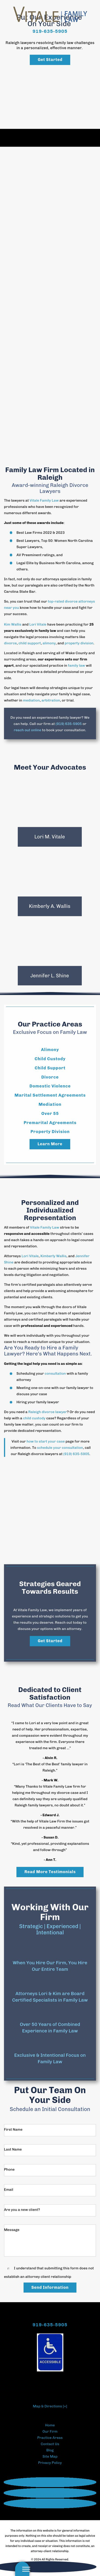 Vitale Family Law - Raleigh NC Lawyers